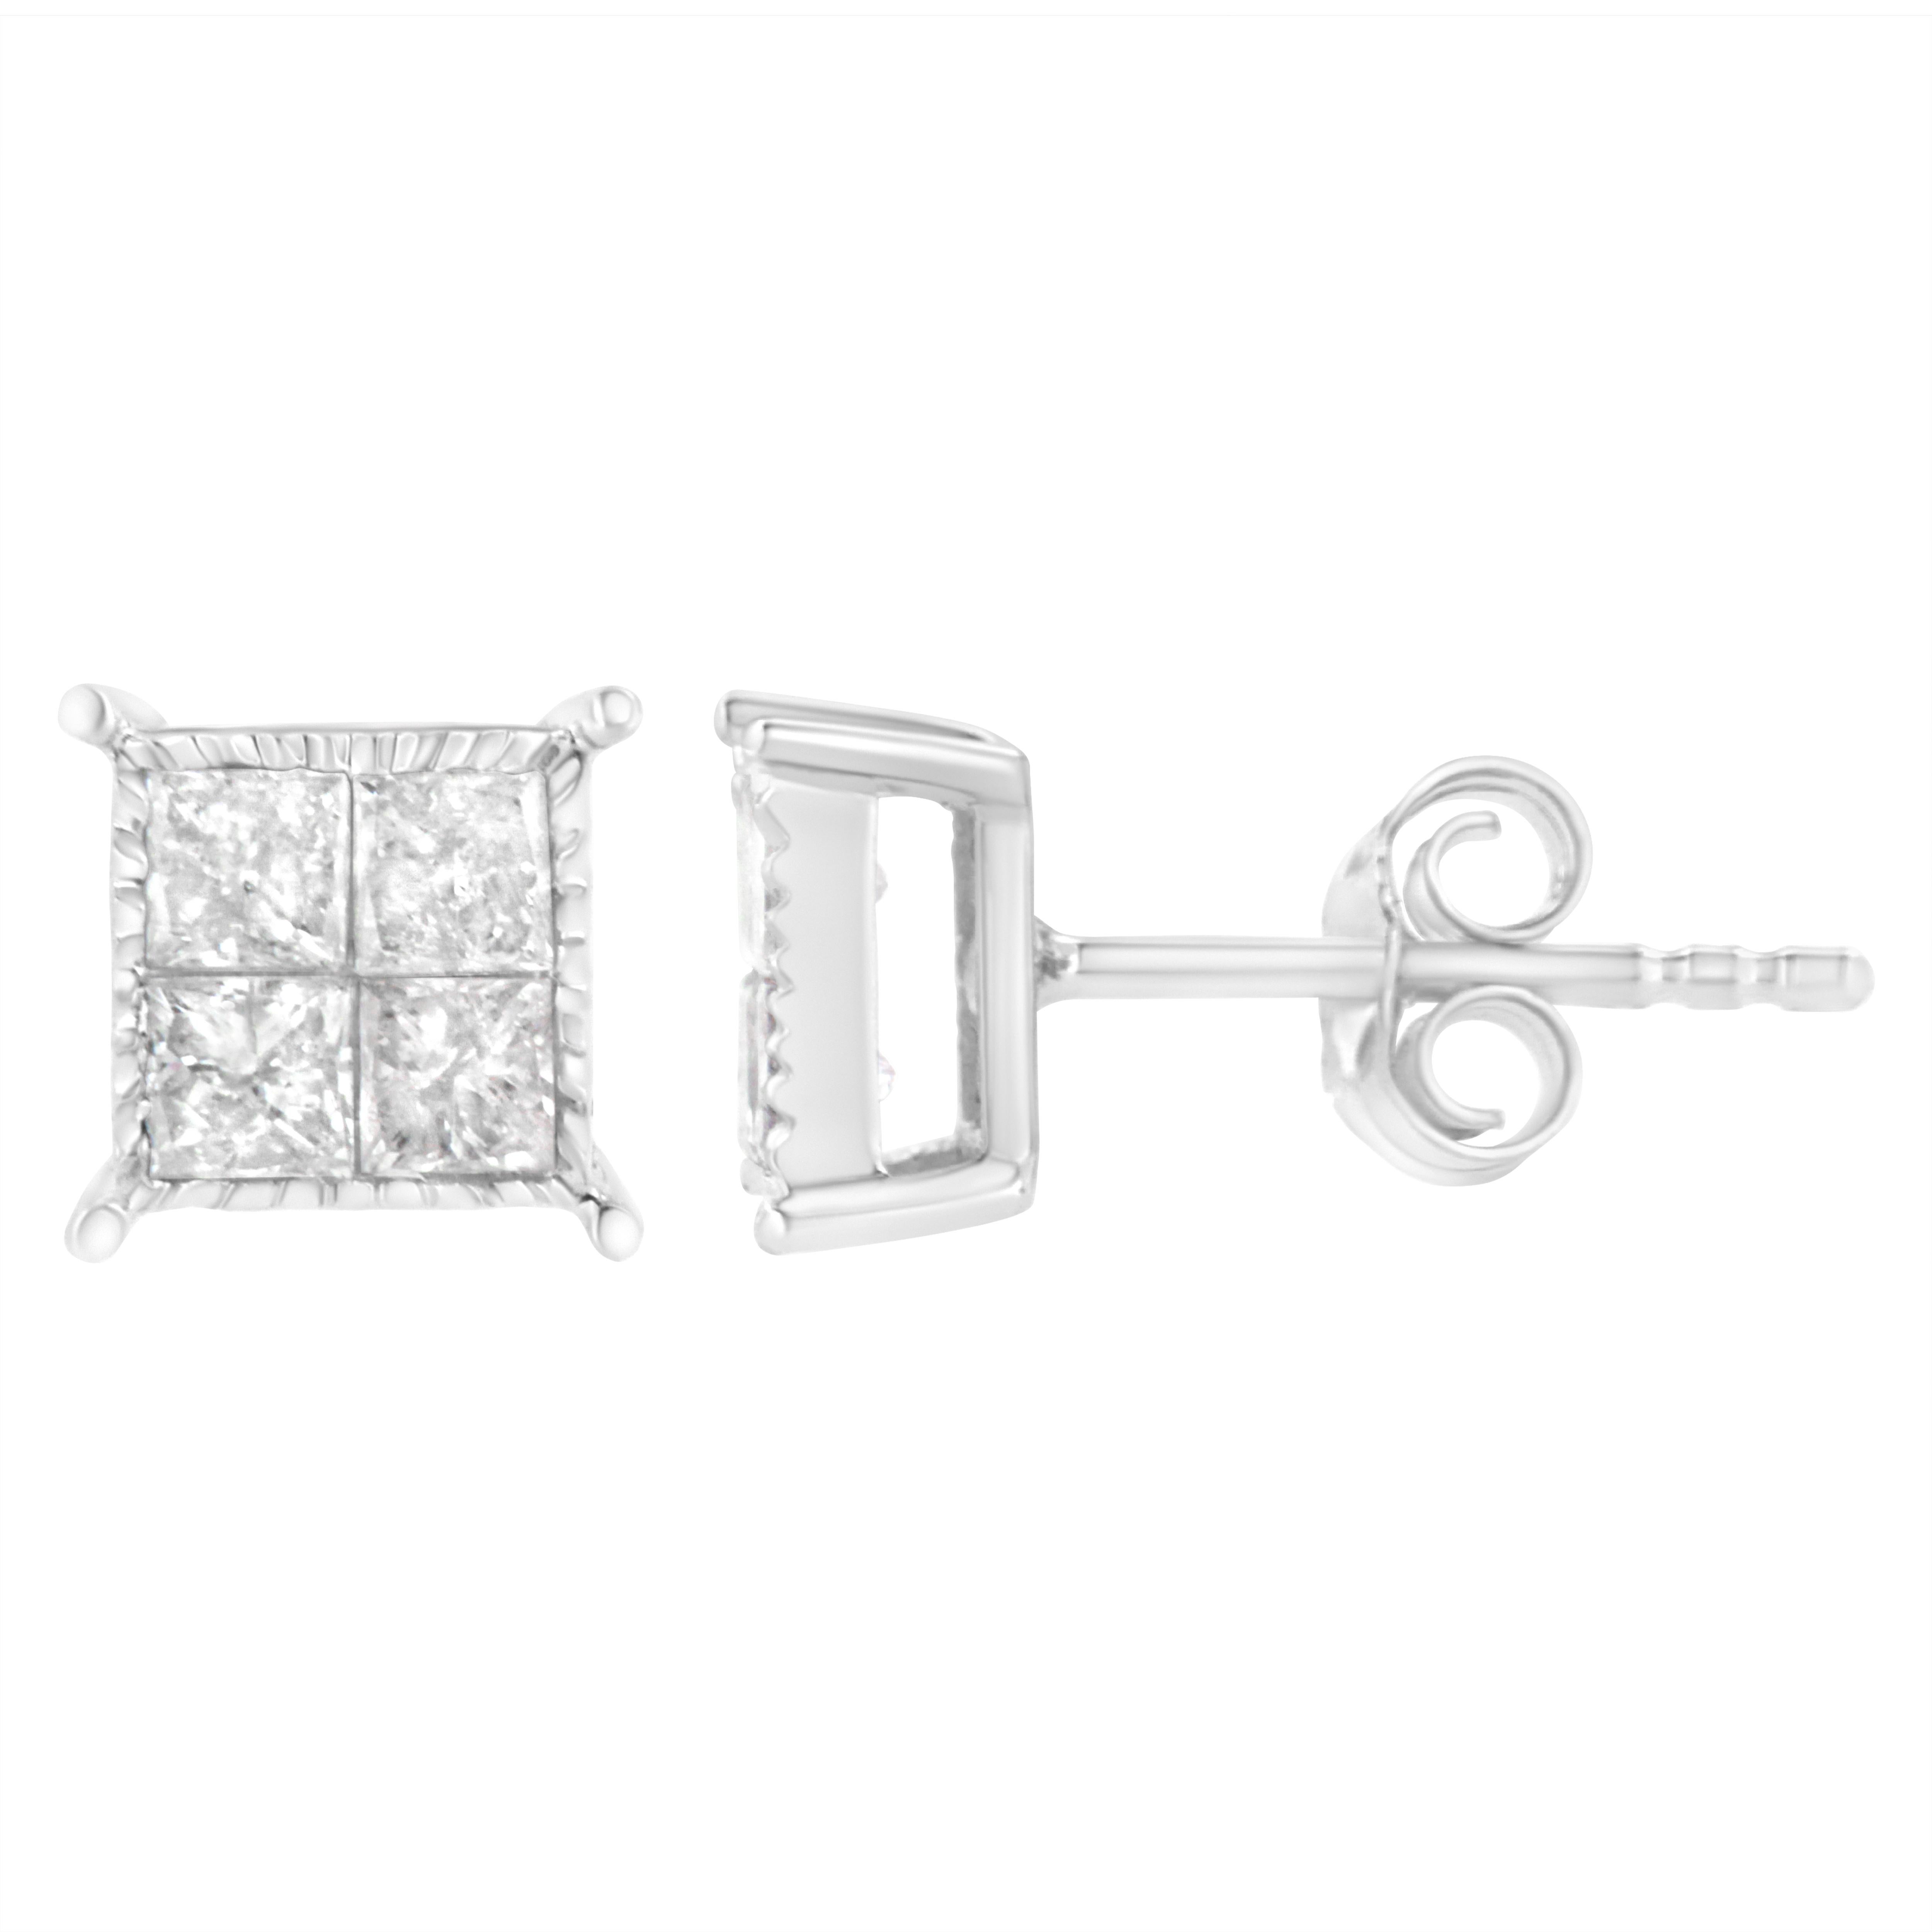 Classic and elegant, these 10k white gold stud earrings feature 3/4ct TDW of diamonds and are perfect for everyday wear. Four, invisible set princess cut diamonds create a square shape and dazzle in each one of these studs. A push back mechanism